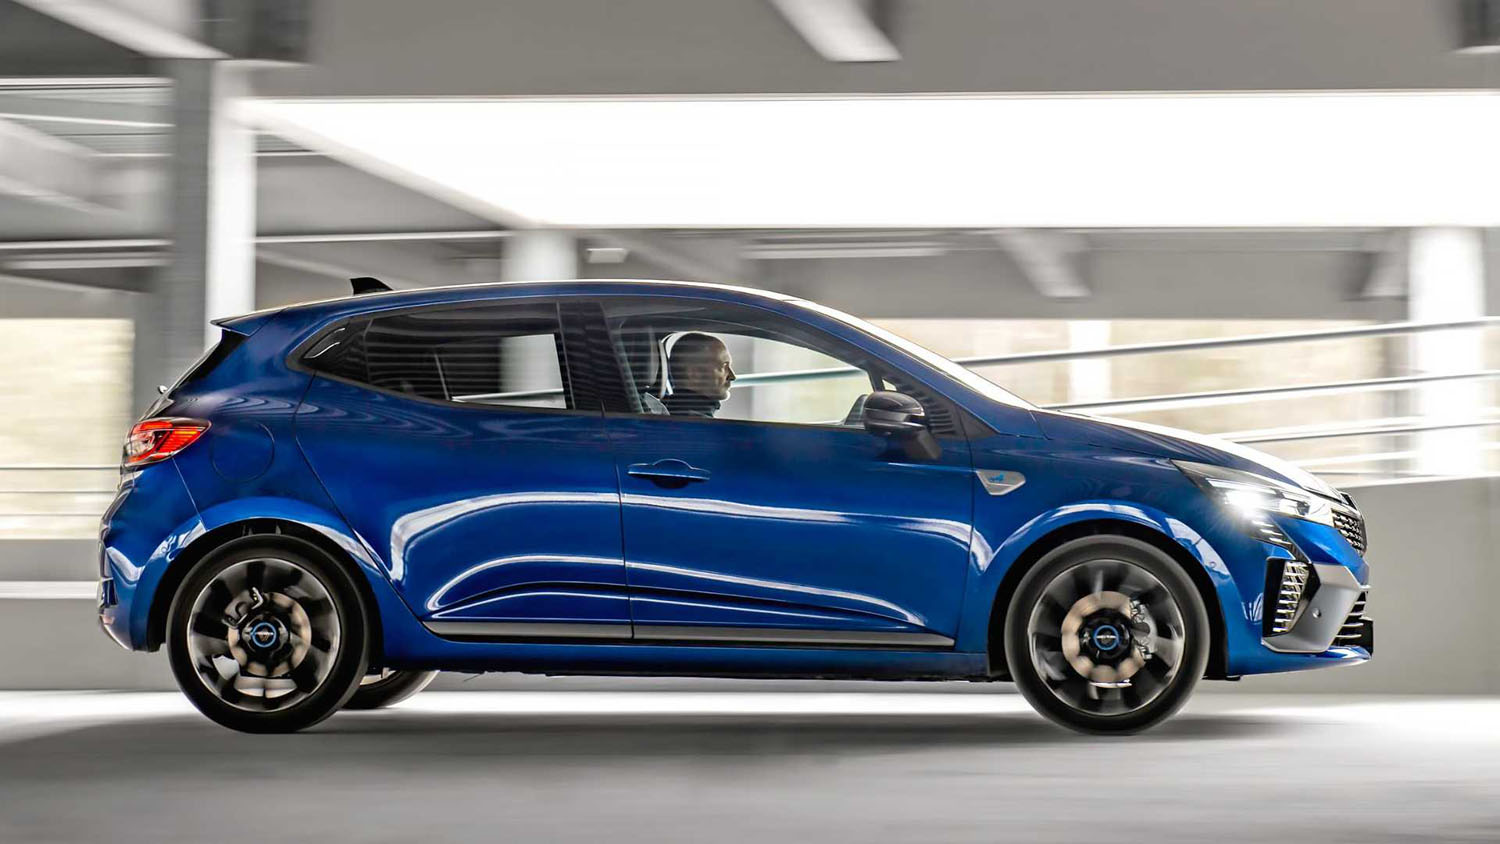 renault, renault clio, when the facelifted renault clio is launching in south africa